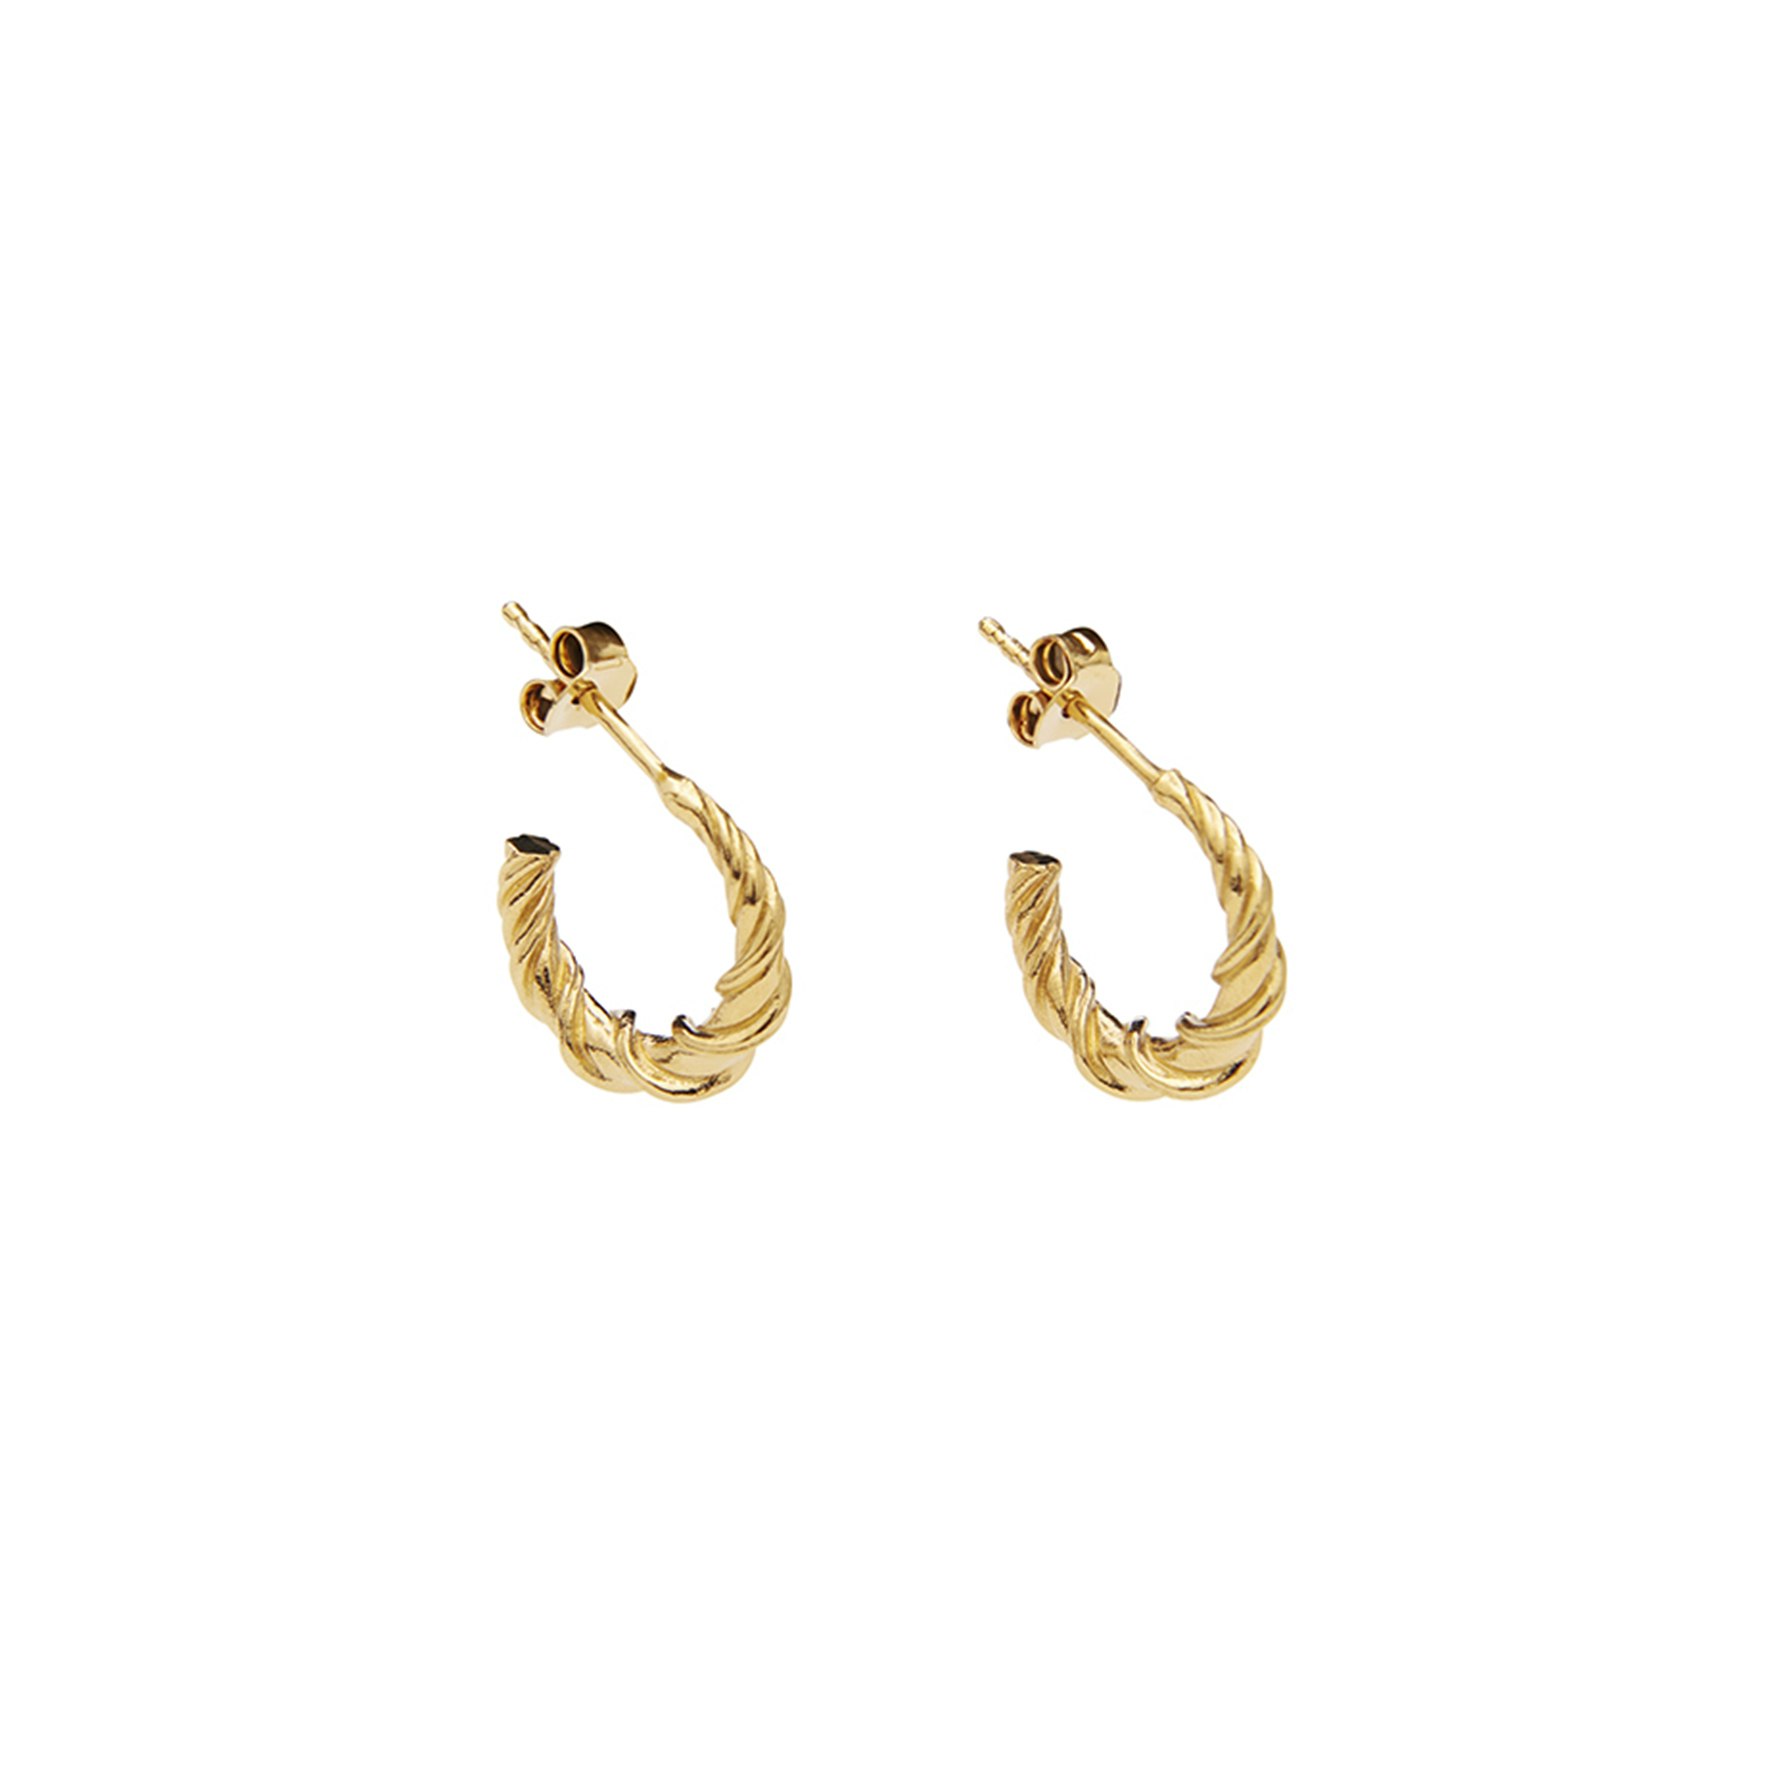 Alinor Studs from Pico in Goldplated Brass